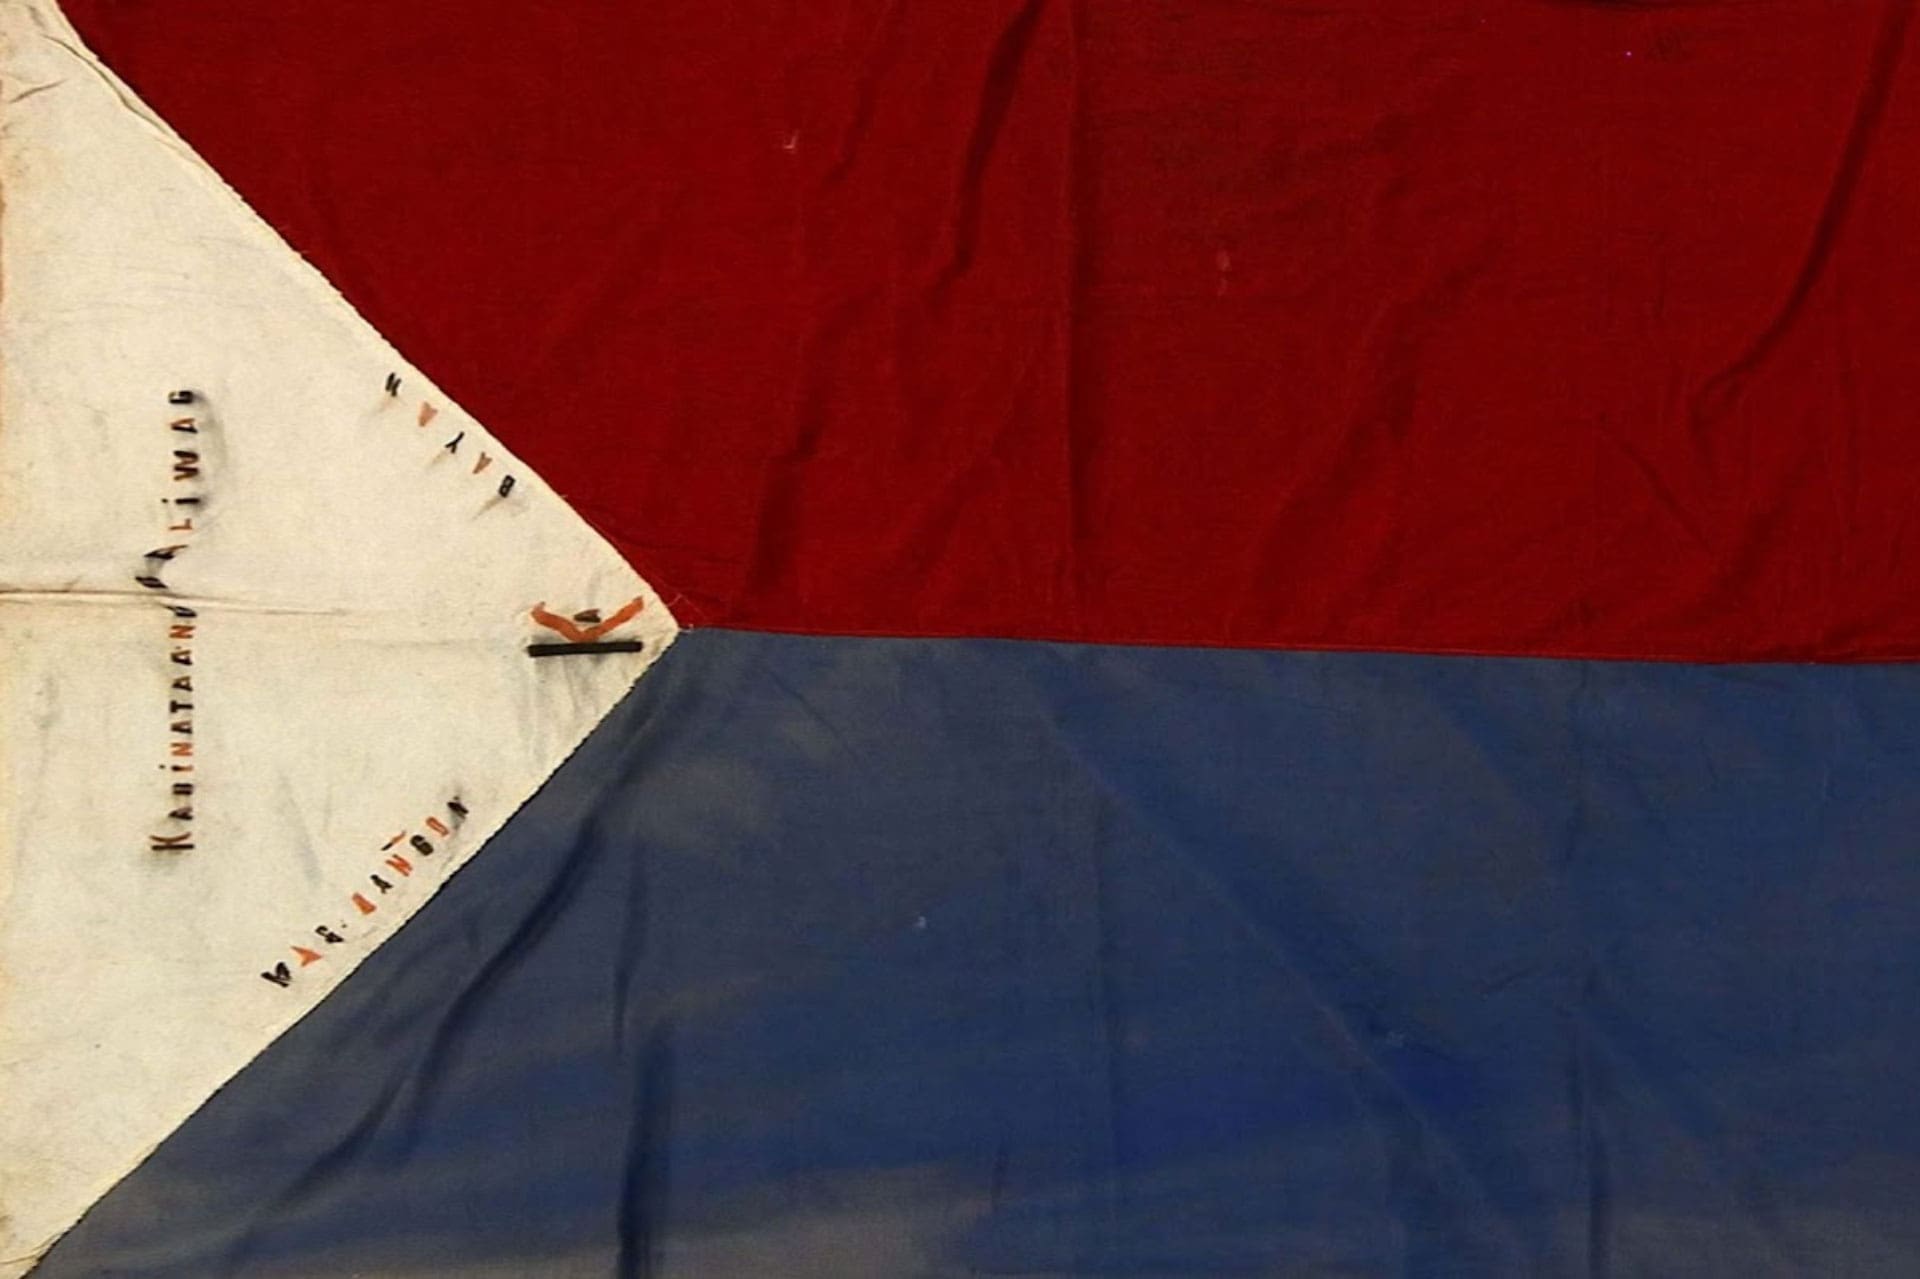 A Philippine flag from the early twentieth century